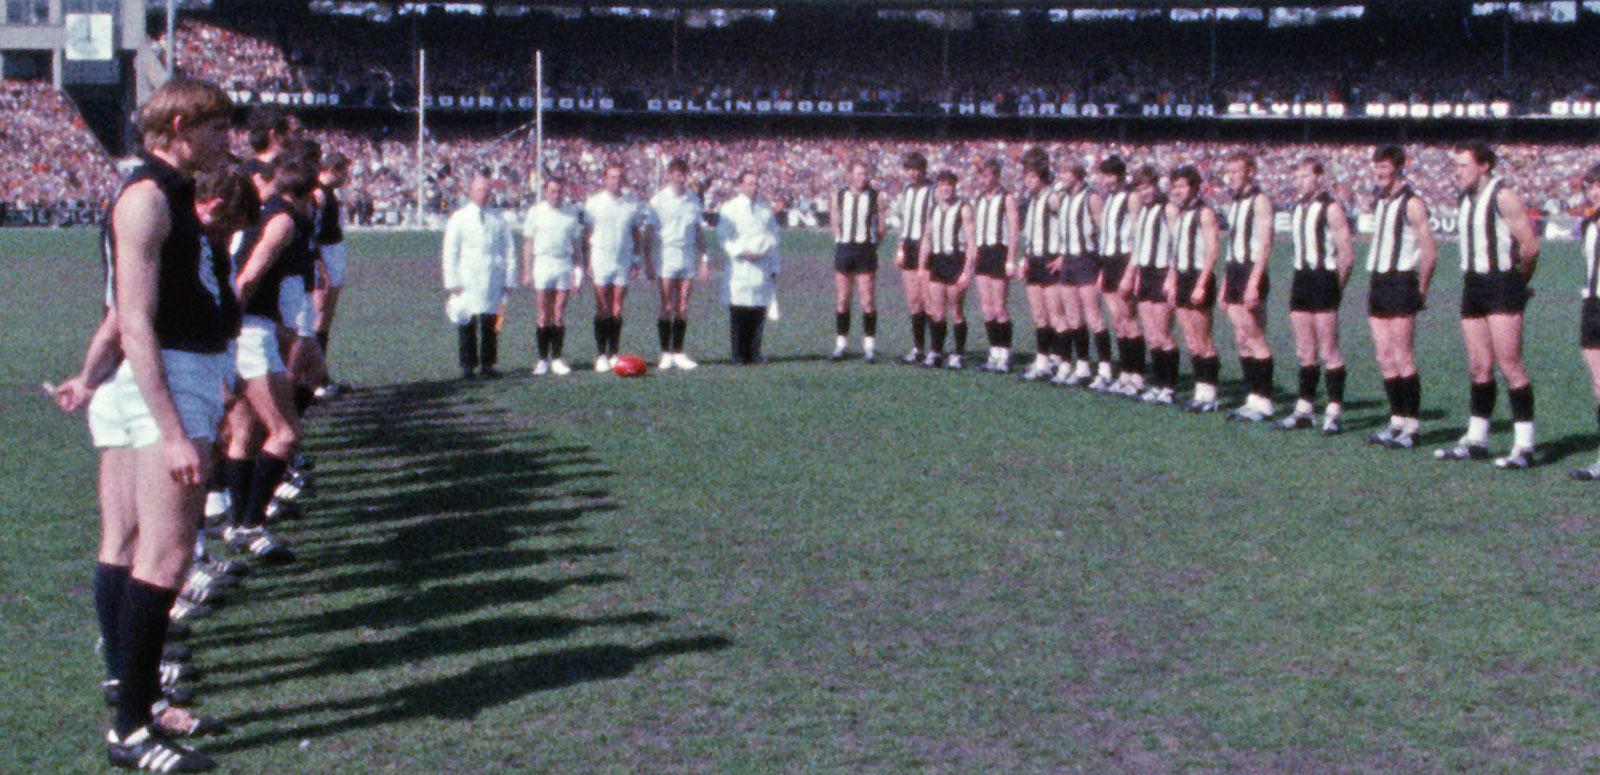 Carlton and Collingwood VFL teams line up on the MCG before the 1970 grand final match.